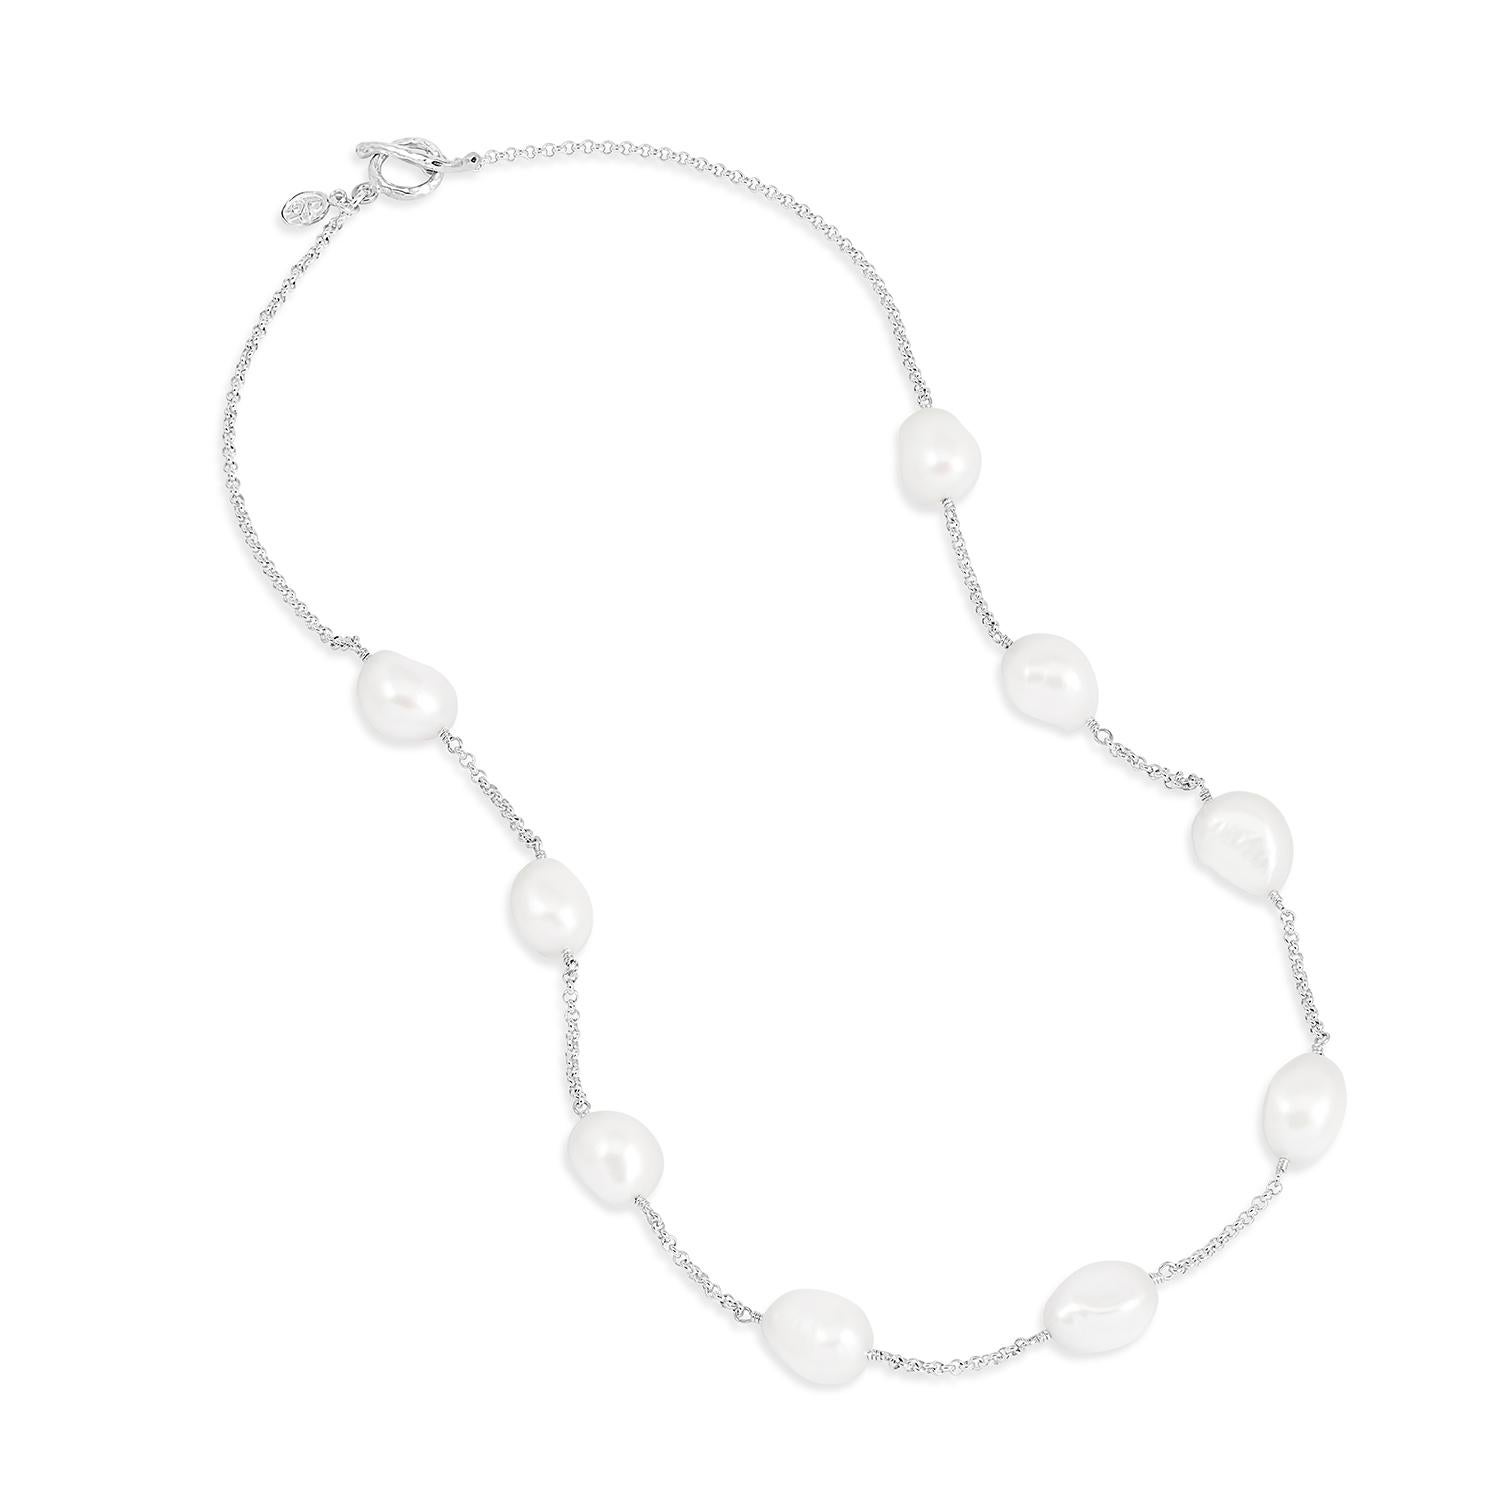 Made in our London studio, this sterling silver necklace features large, lustrous white baroque freshwater pearls suspended on fine chain. The necklace is finished with our signature contemporary hammered loop and t-bar clasp. 

Pearl sizes -